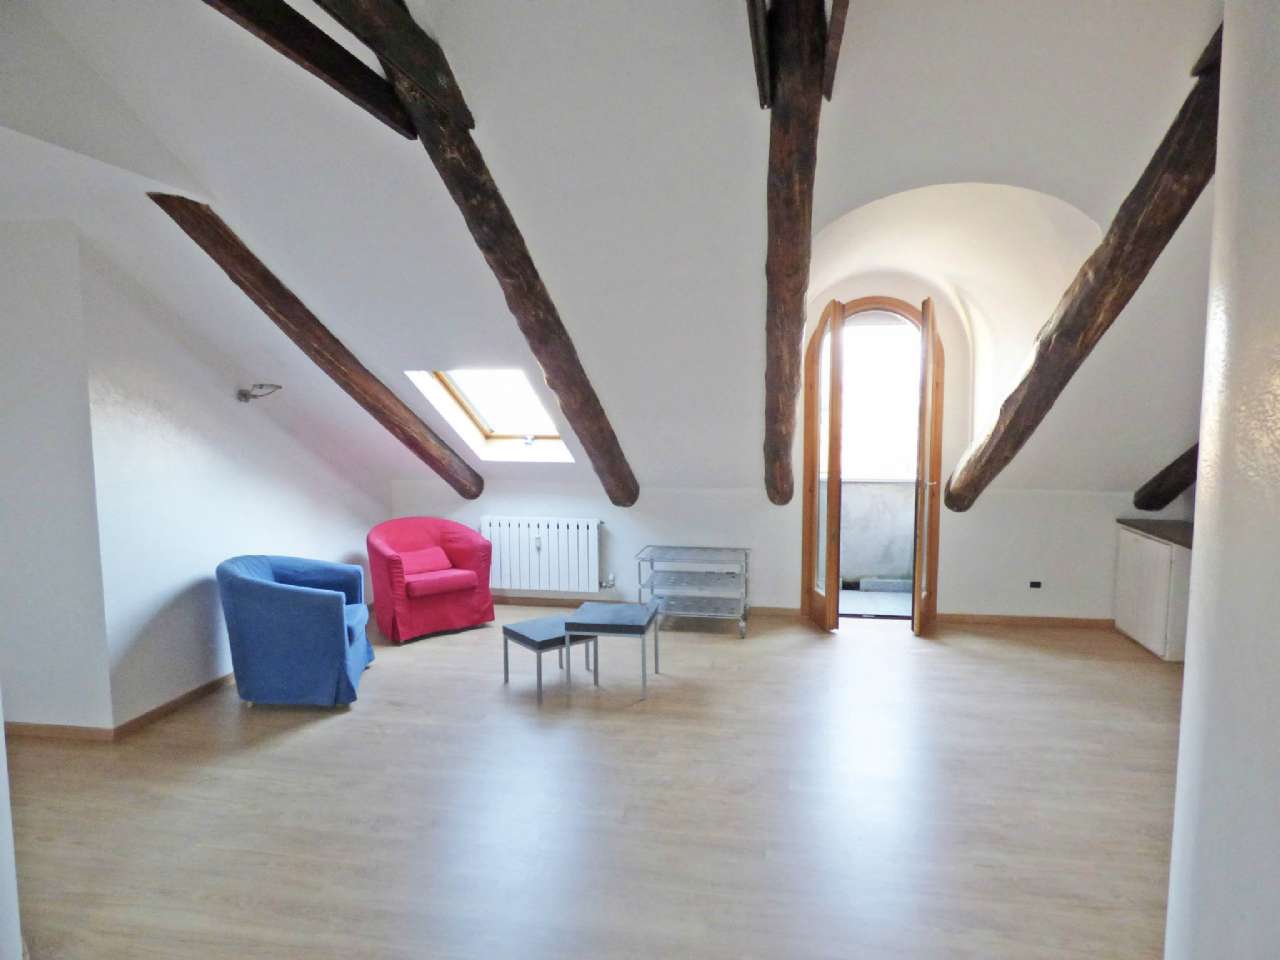 Attic for Rent to Torino